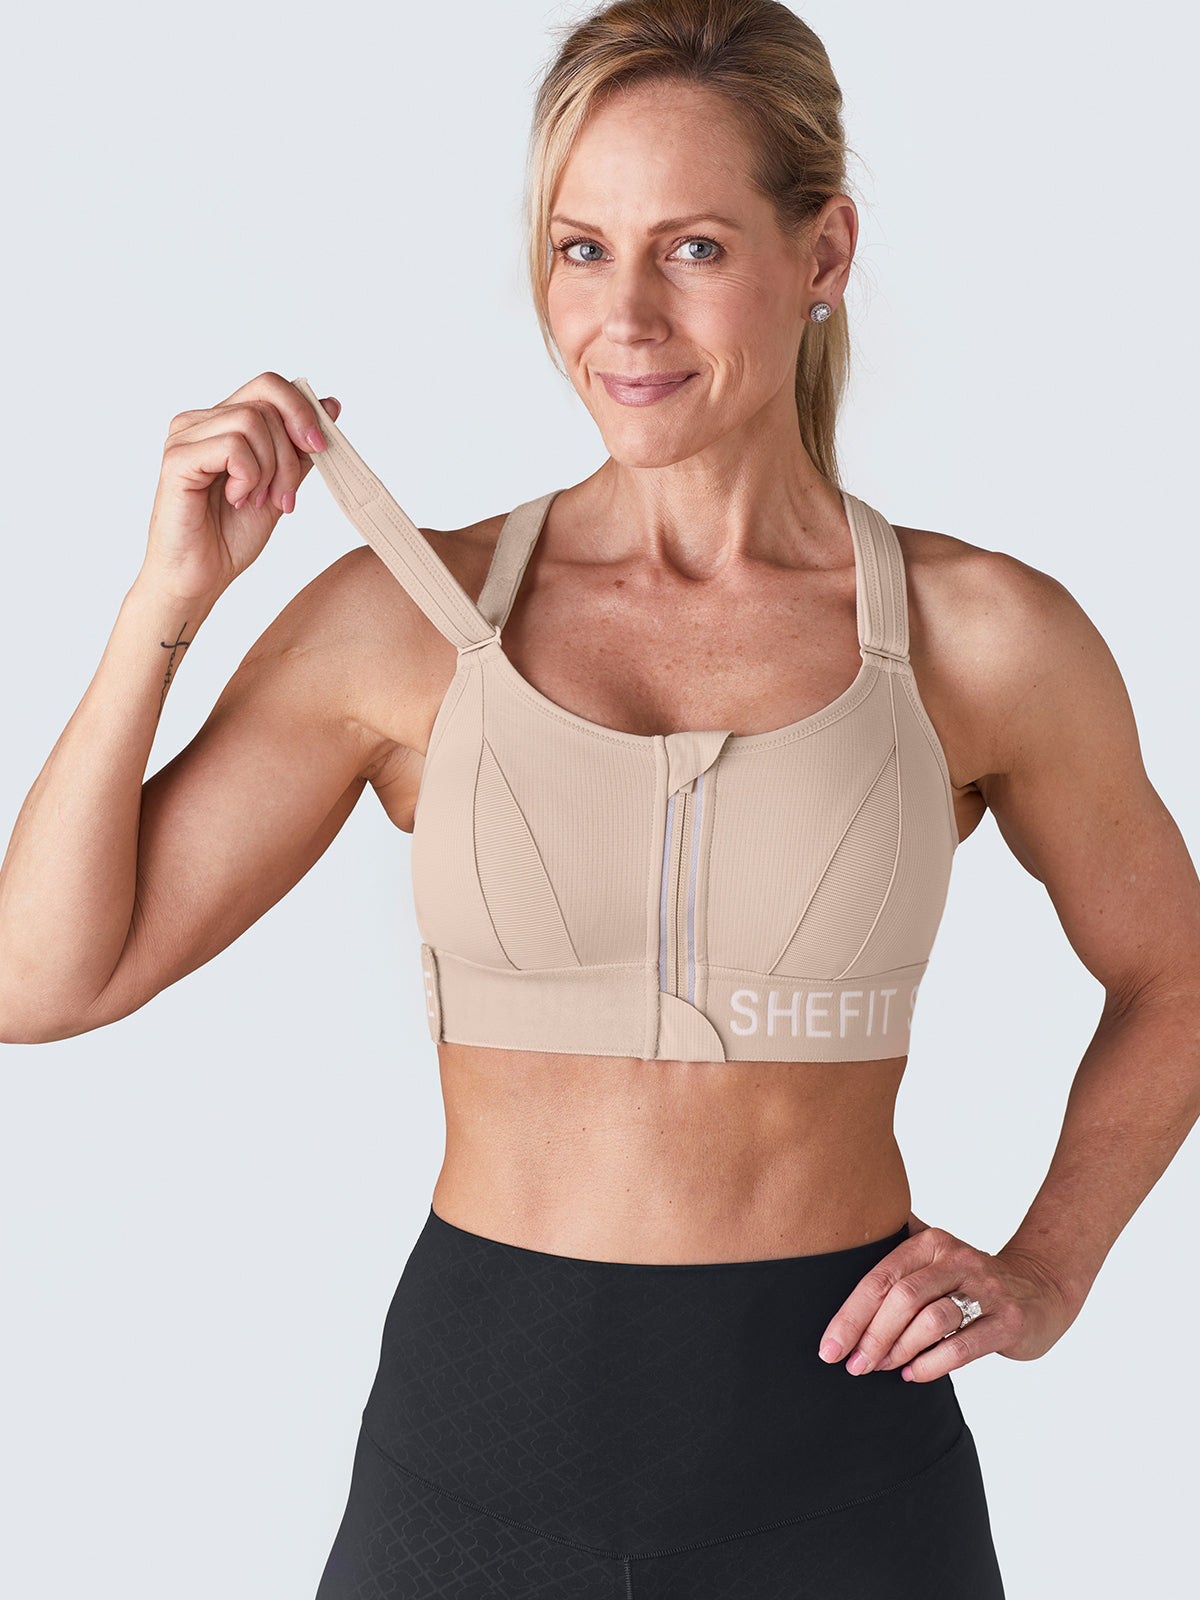 SHEFIT - Let's talk ZIP. CINCH. LIFT.™️ for 10 seconds, which is